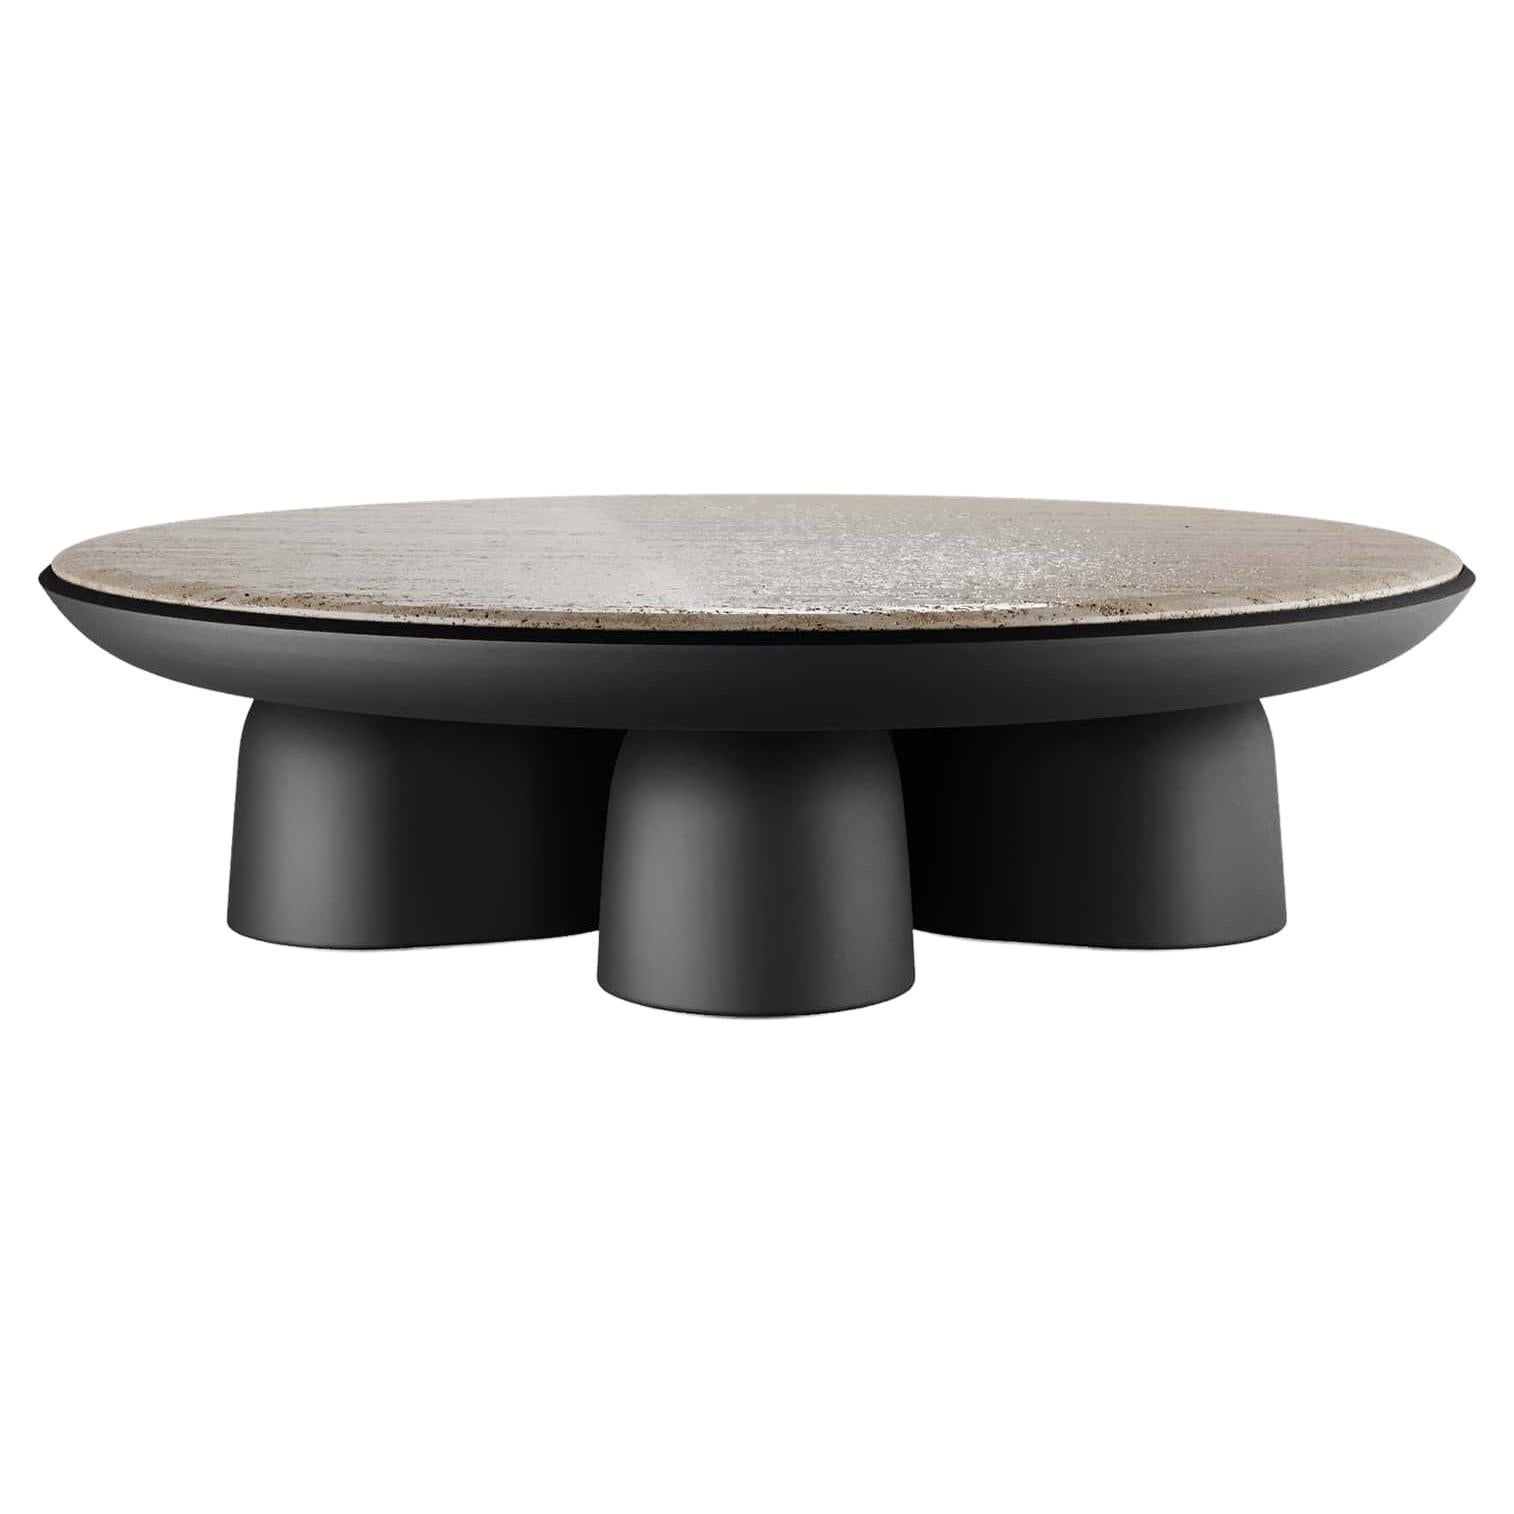 Modern Center Table Black with Tabletop in Travertine Marble and Feet in Wood For Sale